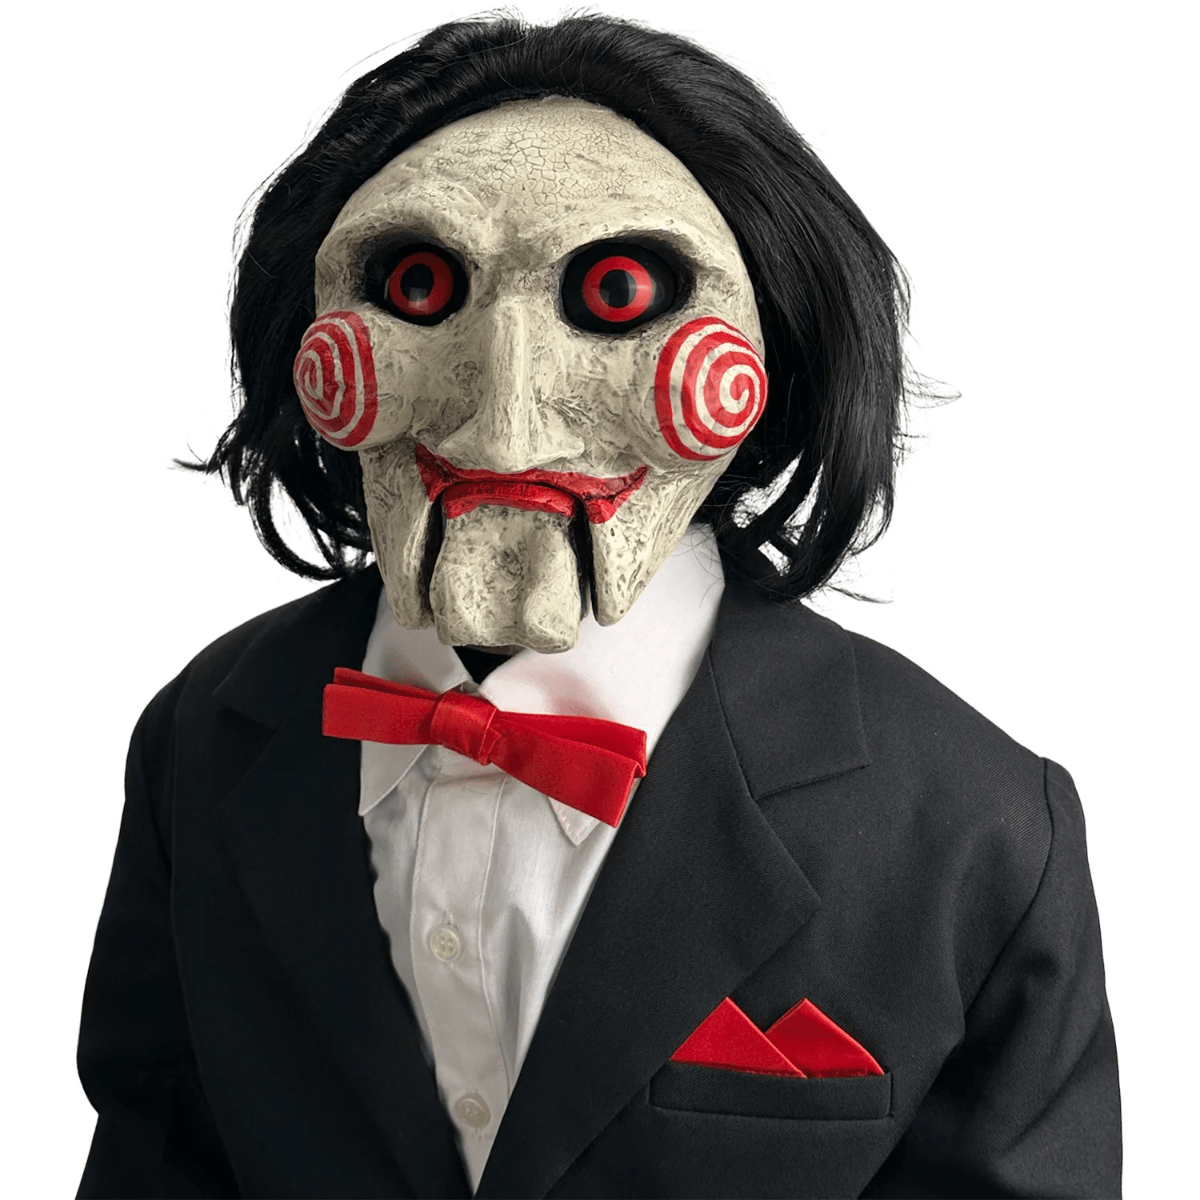 TTSMALG102 Saw - Billy Puppet Prop Replica with Sound & Motion - Trick or Treat Studios - Titan Pop Culture